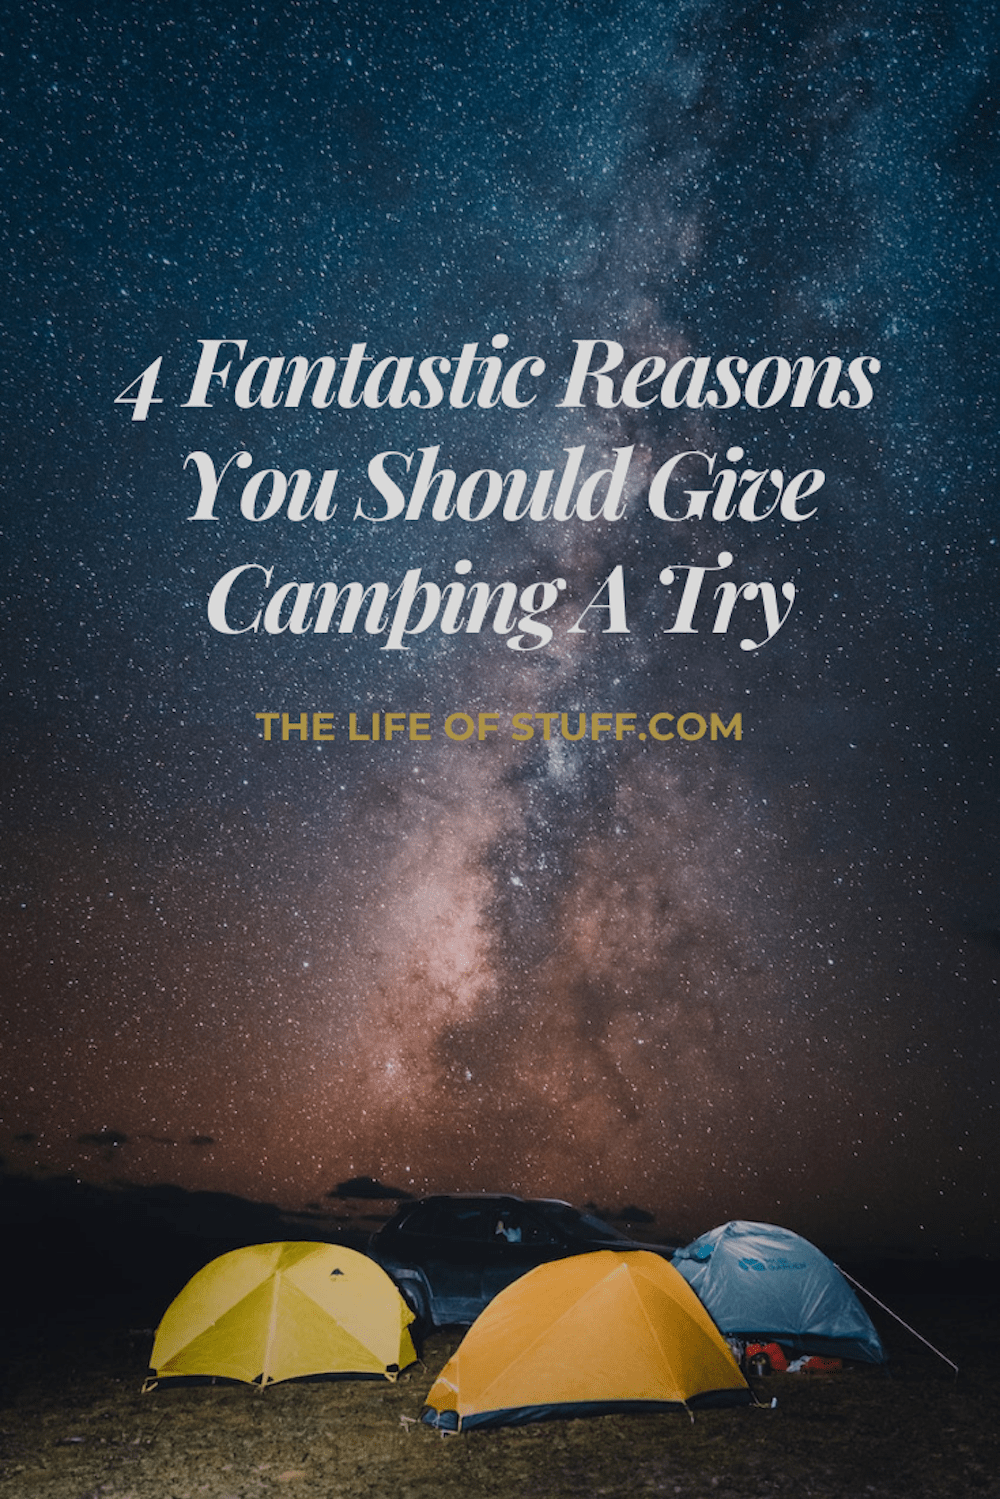 4 Fantastic Reasons You Should Give Camping A Try - The Life of Stuff